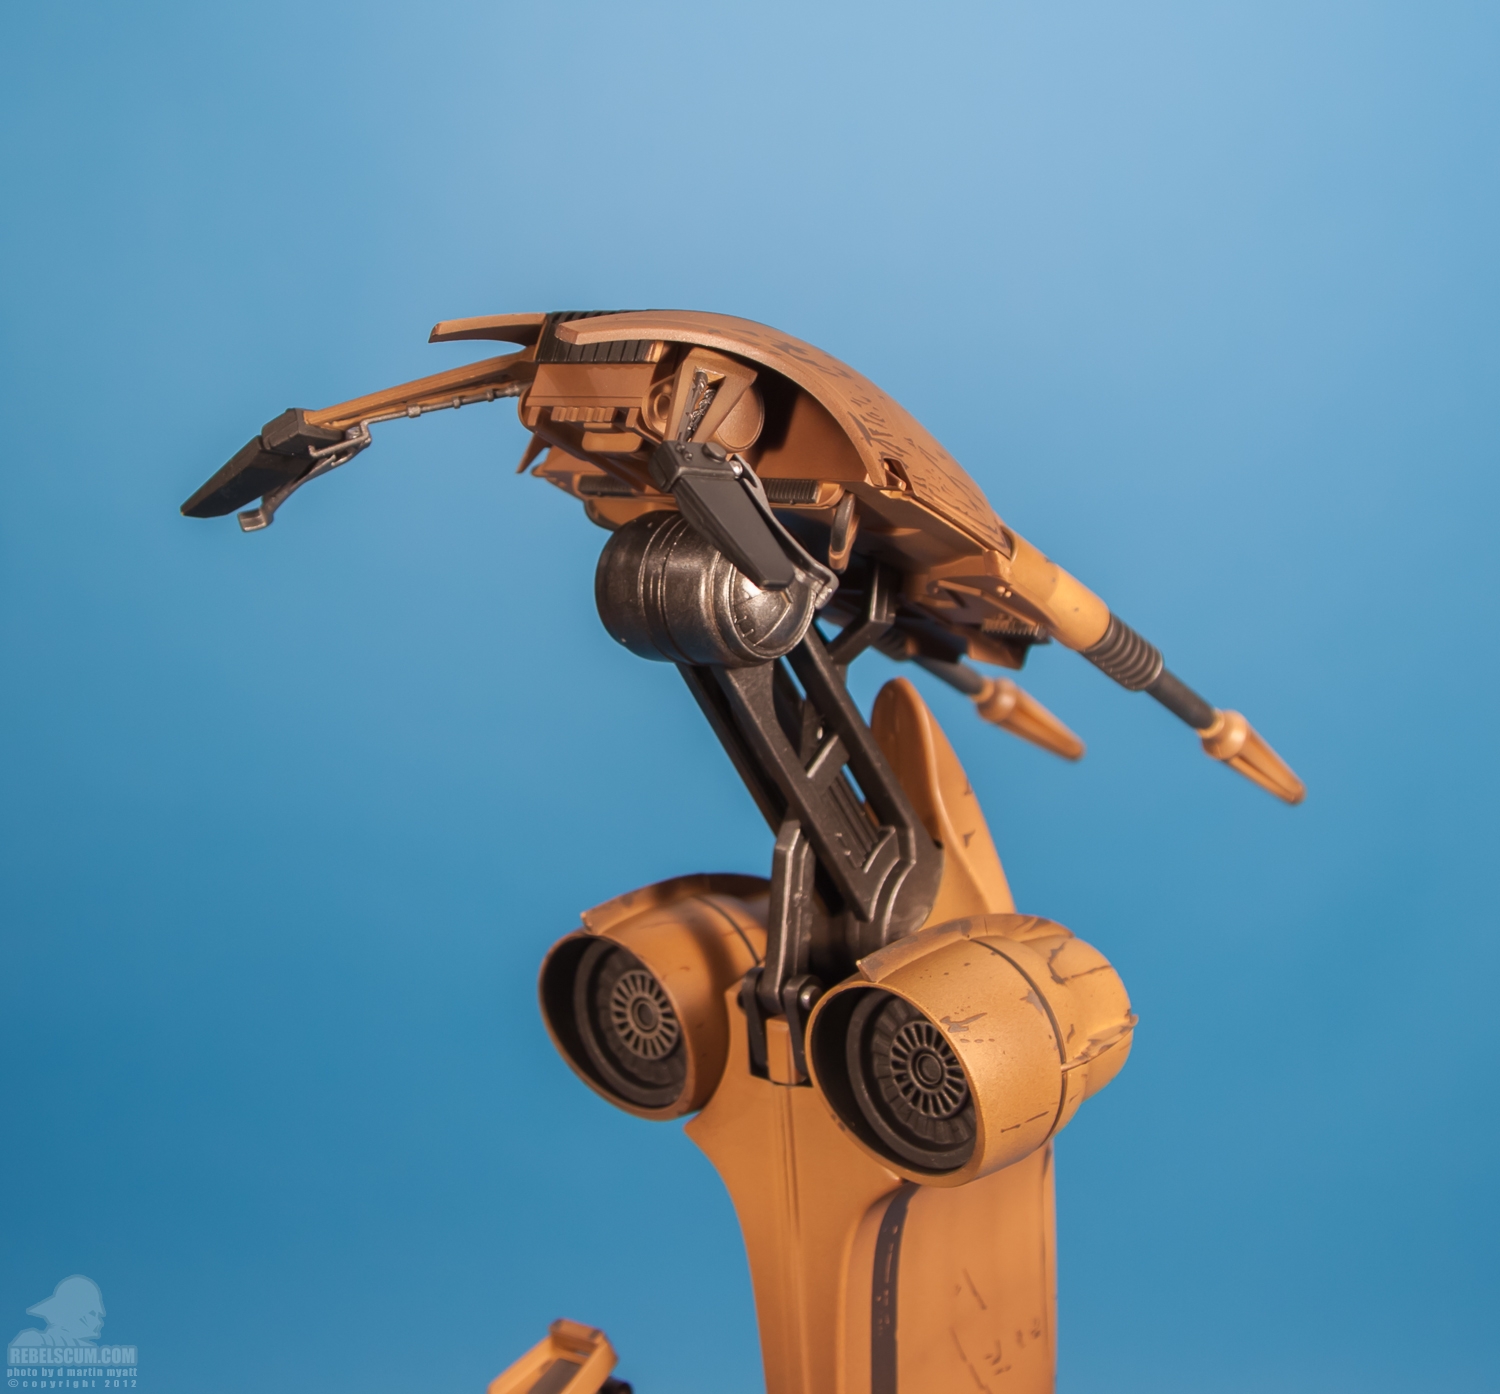 STAP_Battle_Droid_Star_Wars_Sideshow_Collectibles-34.jpg